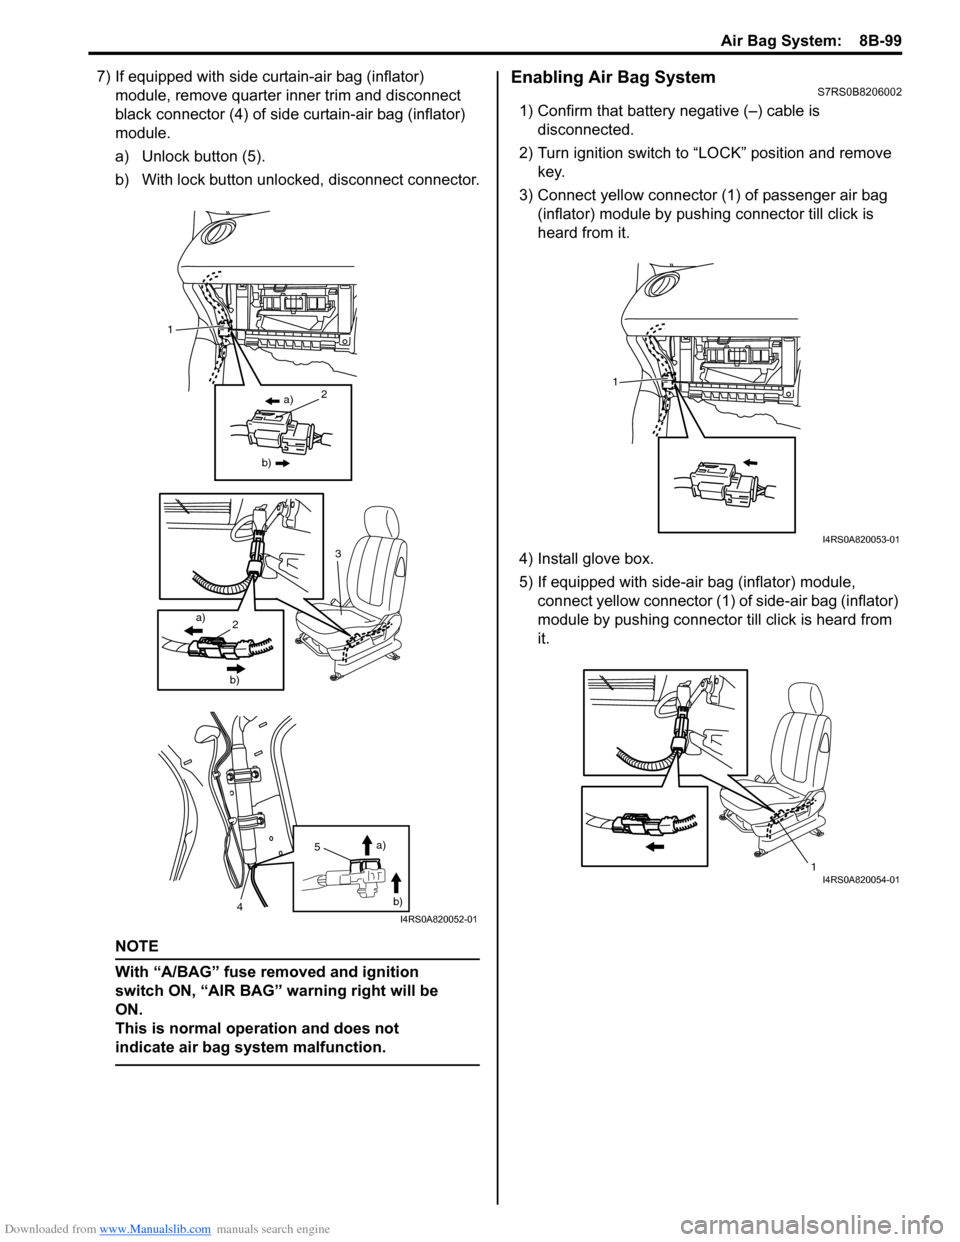 SUZUKI SWIFT 2006 2.G Service Workshop Manual Downloaded from www.Manualslib.com manuals search engine Air Bag System:  8B-99
7) If equipped with side curtain-air bag (inflator) module, remove quarter inner trim and disconnect 
black connector (4